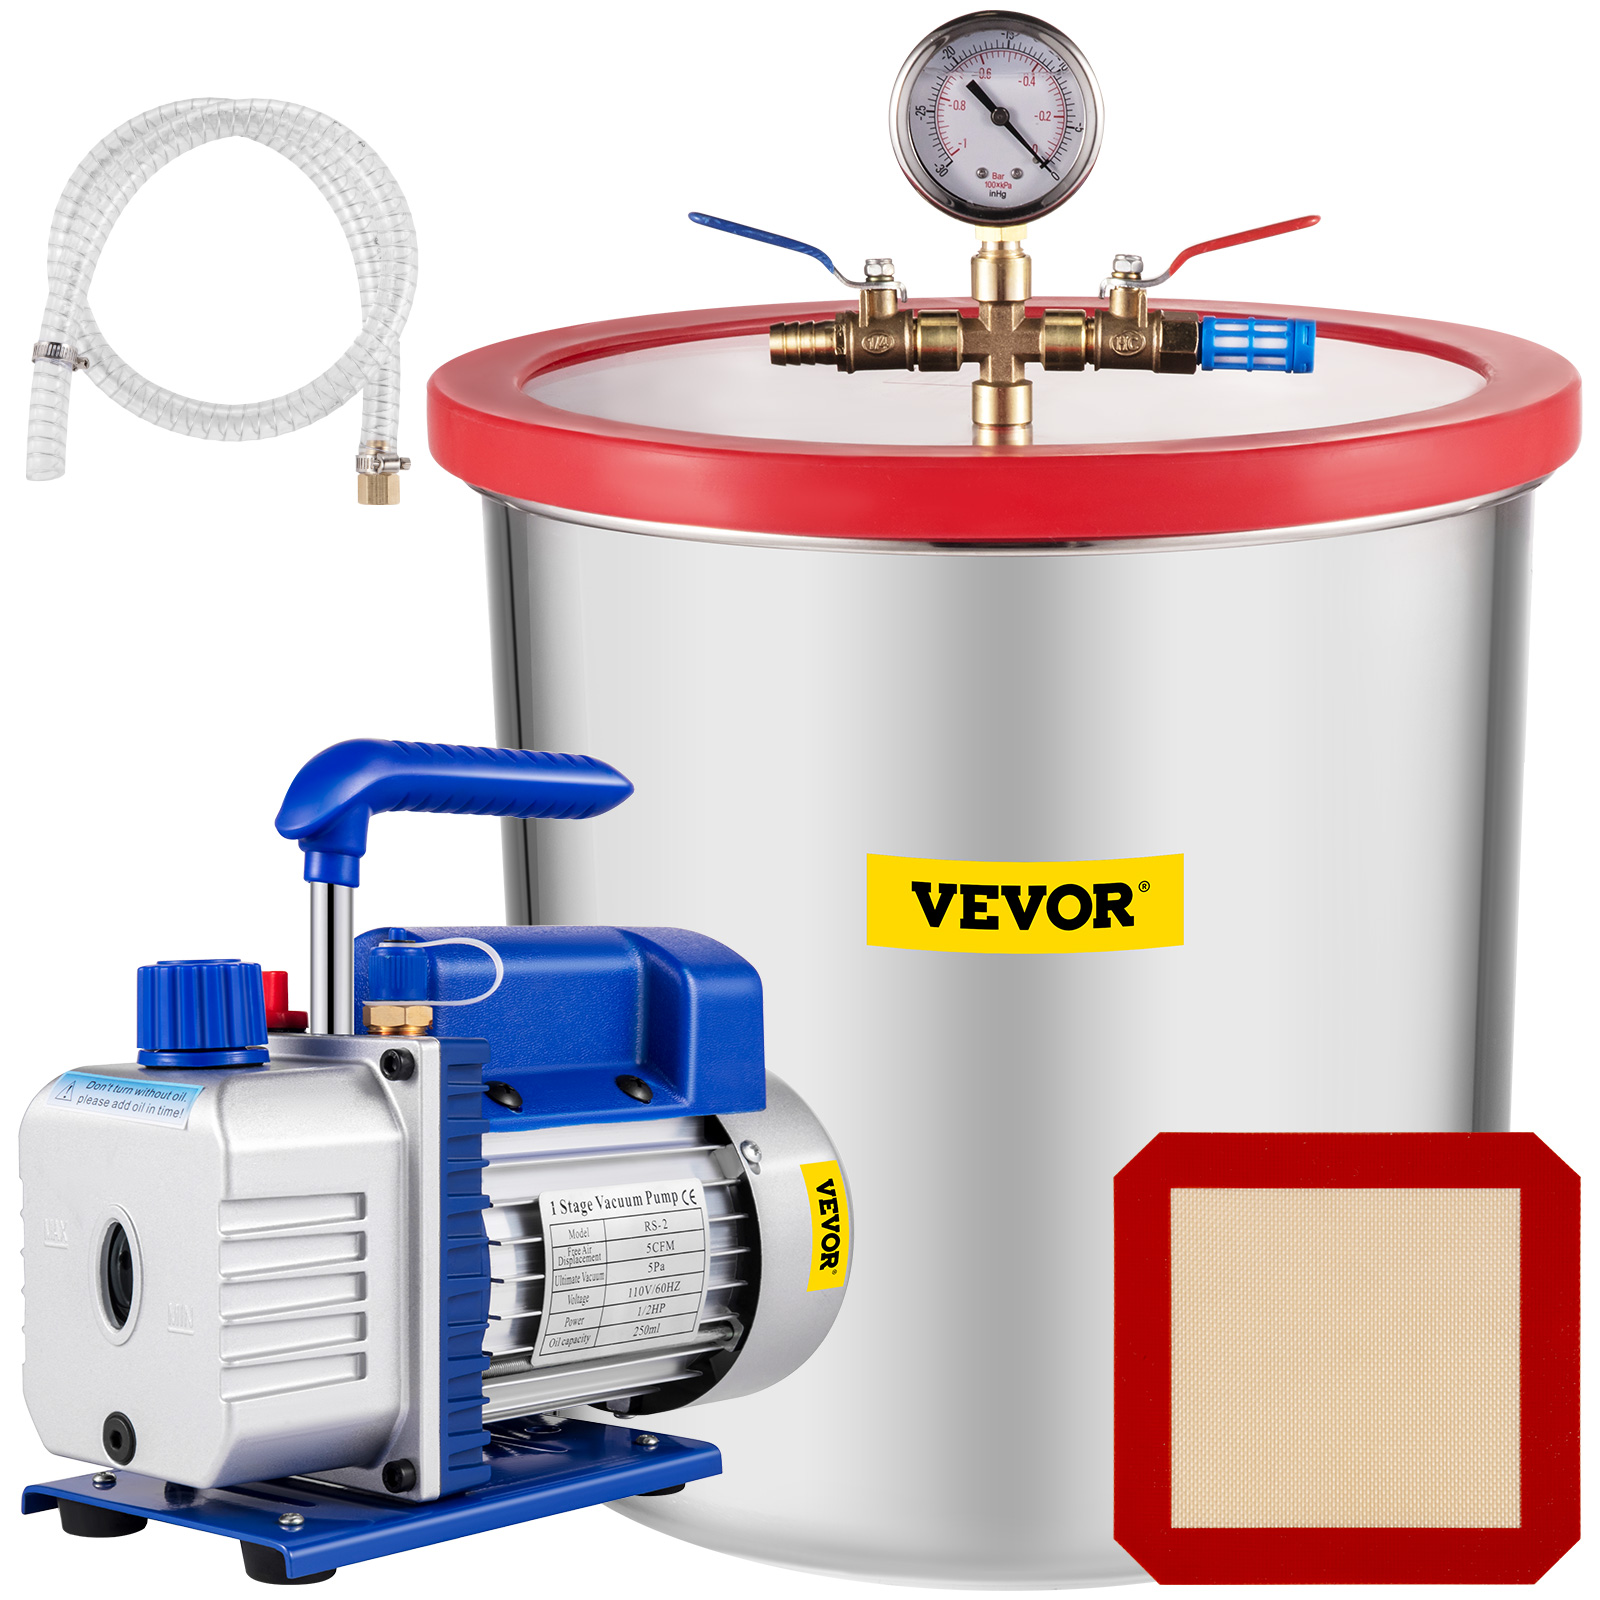 5 Gallon Vacuum Chamber Stainless Steel Degassing Silicone Kit 5CFM Vacuum Pump от Vevor Many GEOs